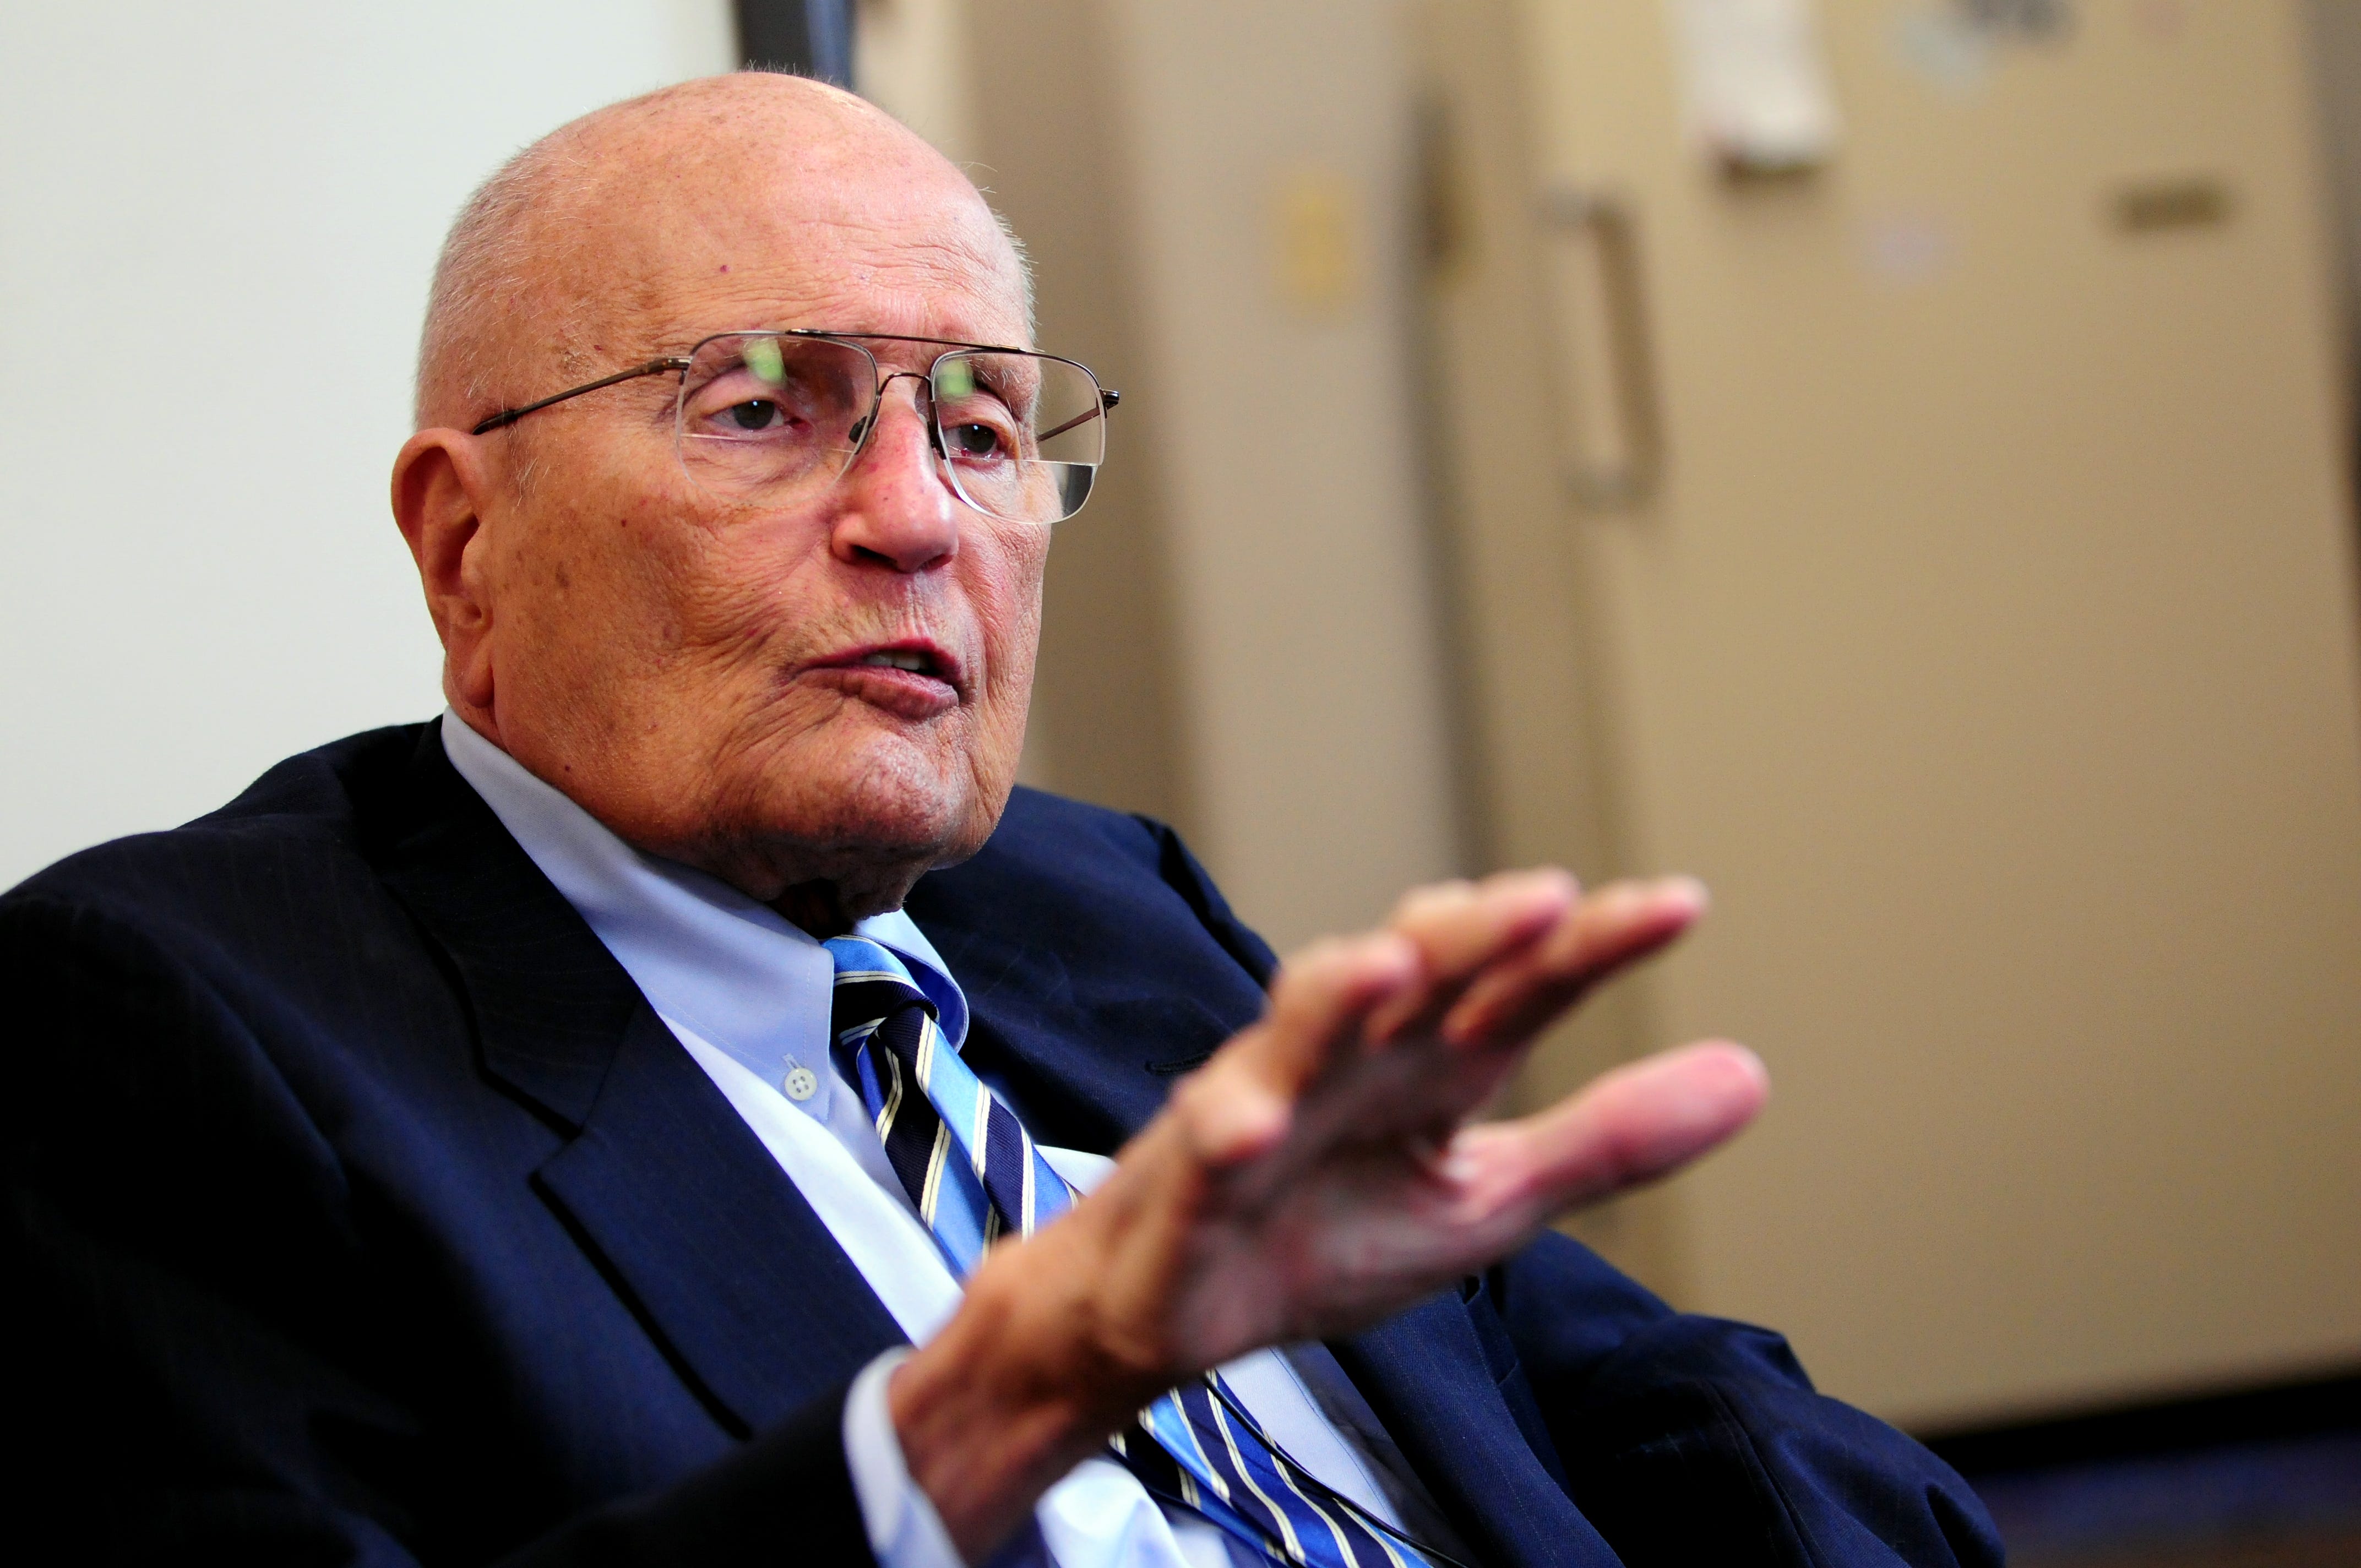 Dingell spent some of his final years in Congress bemoaning the lack of cooperation and compromise that often brought the passage of legislation to a grinding halt. "I've never seen such small-minded, miserable behavior in this House of Representatives and such a disregard of our responsibilities to the people," he said.